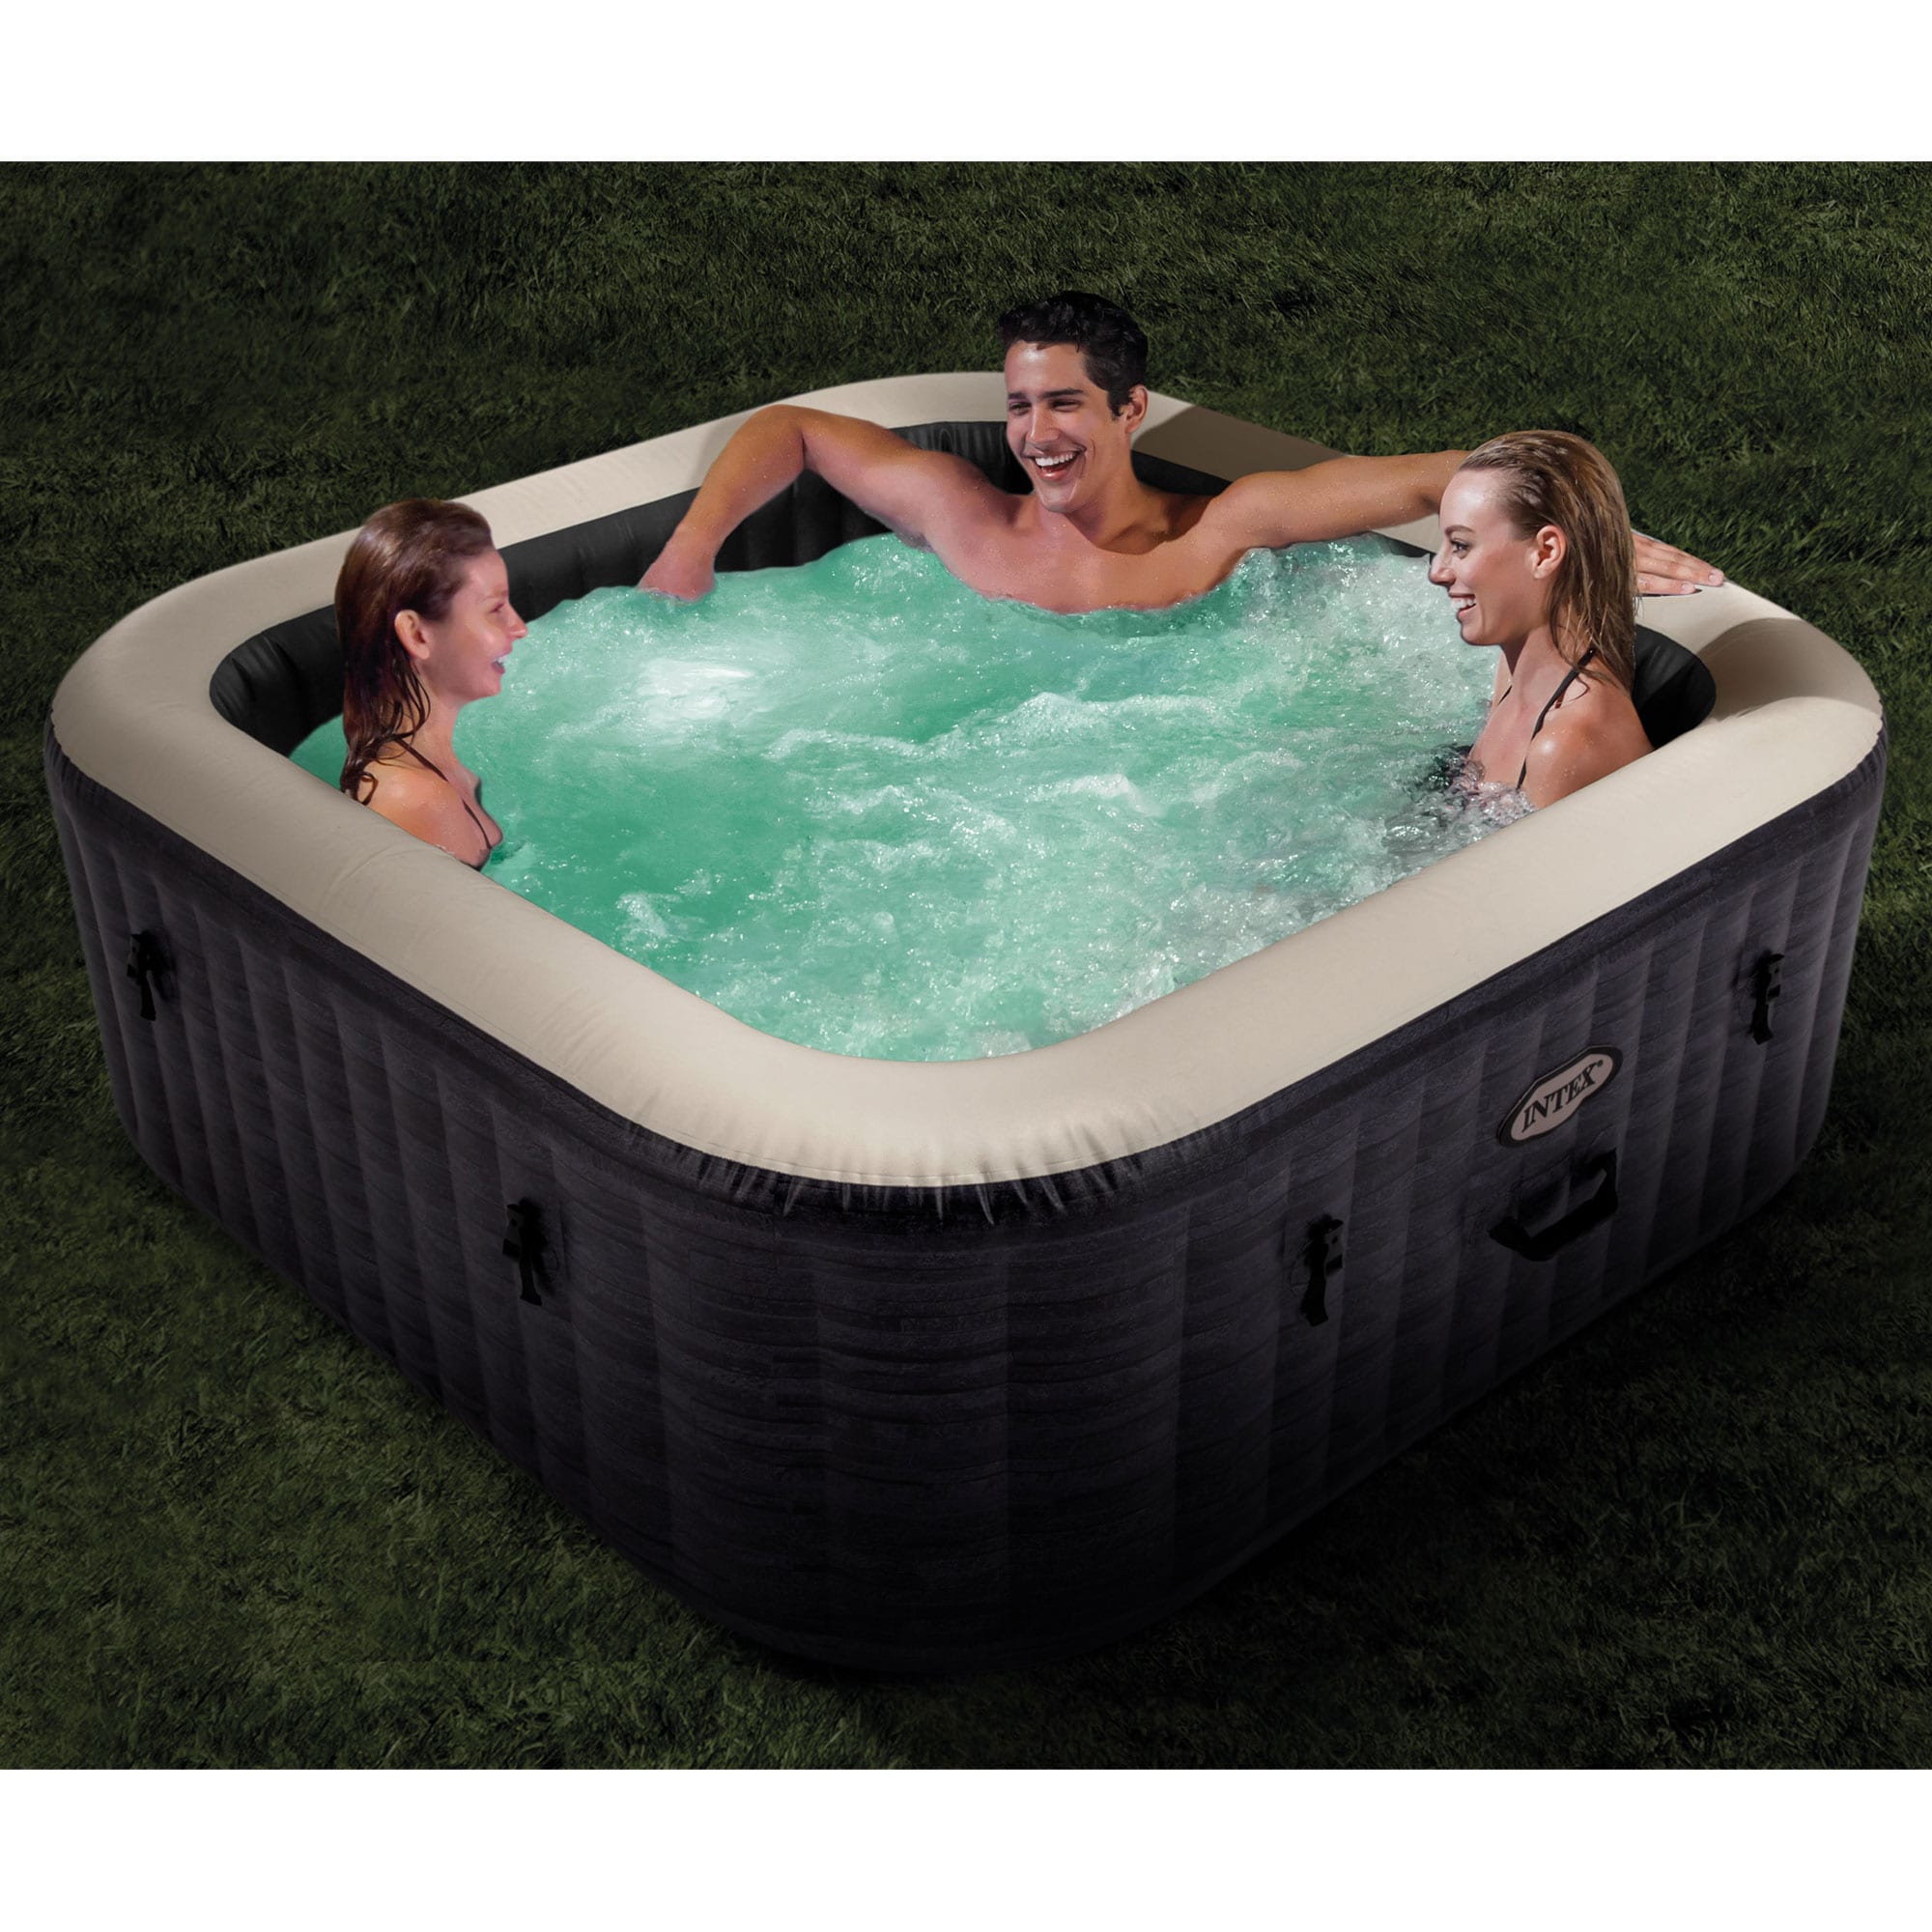 Hot Tub Pad for Inflatable Hot Tub,Extral Large Ground Mat for